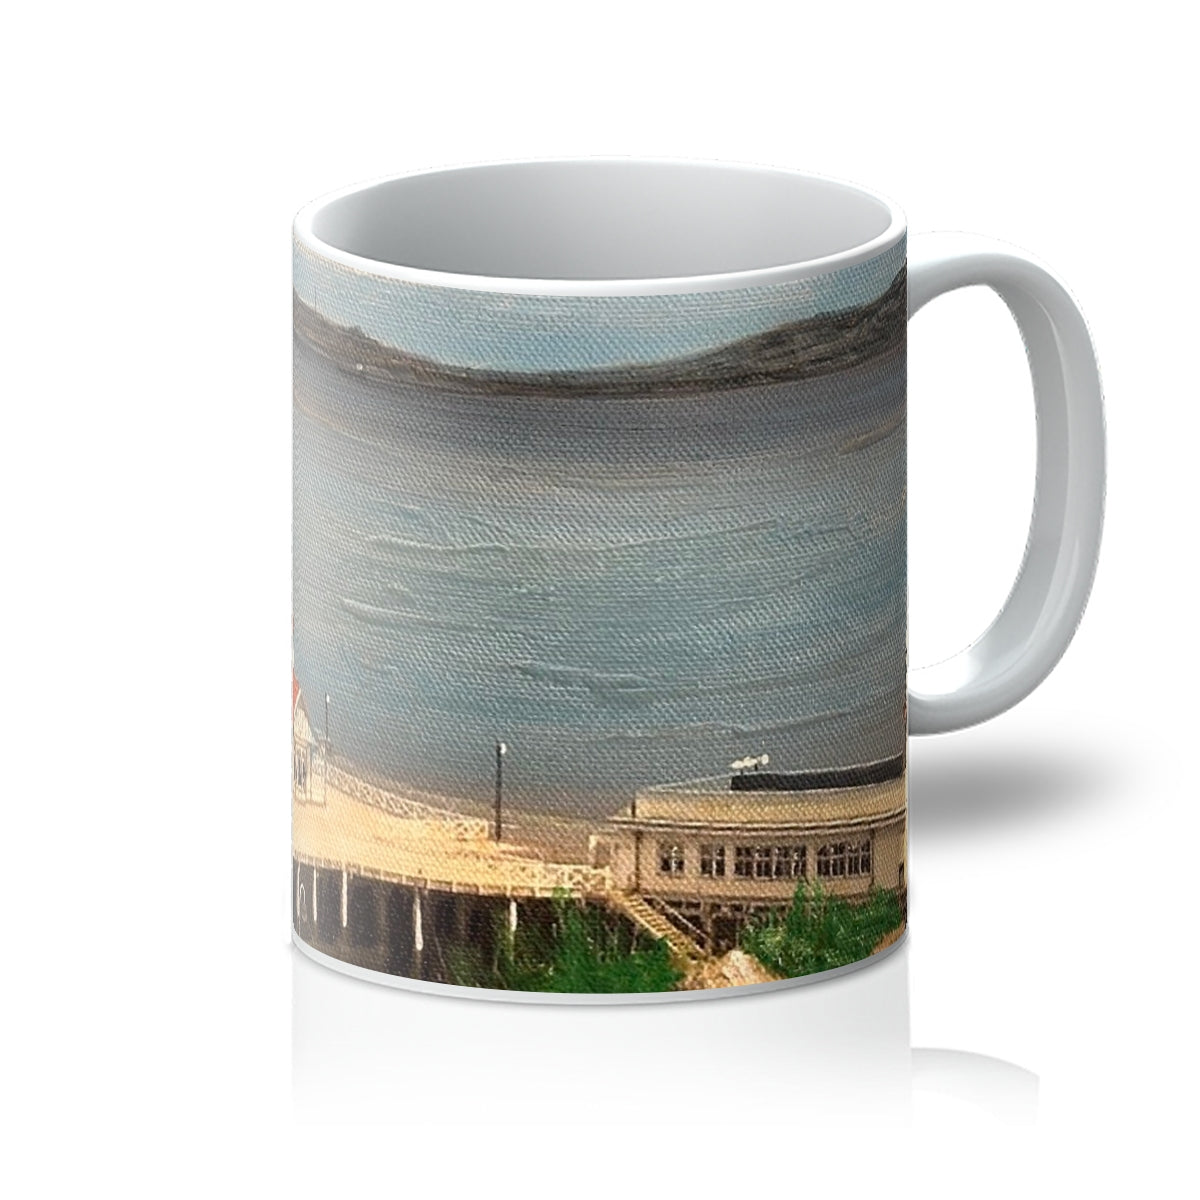 Looking From Dunoon Art Gifts Mug-Homeware-River Clyde Art Gallery-11oz-White-Paintings, Prints, Homeware, Art Gifts From Scotland By Scottish Artist Kevin Hunter